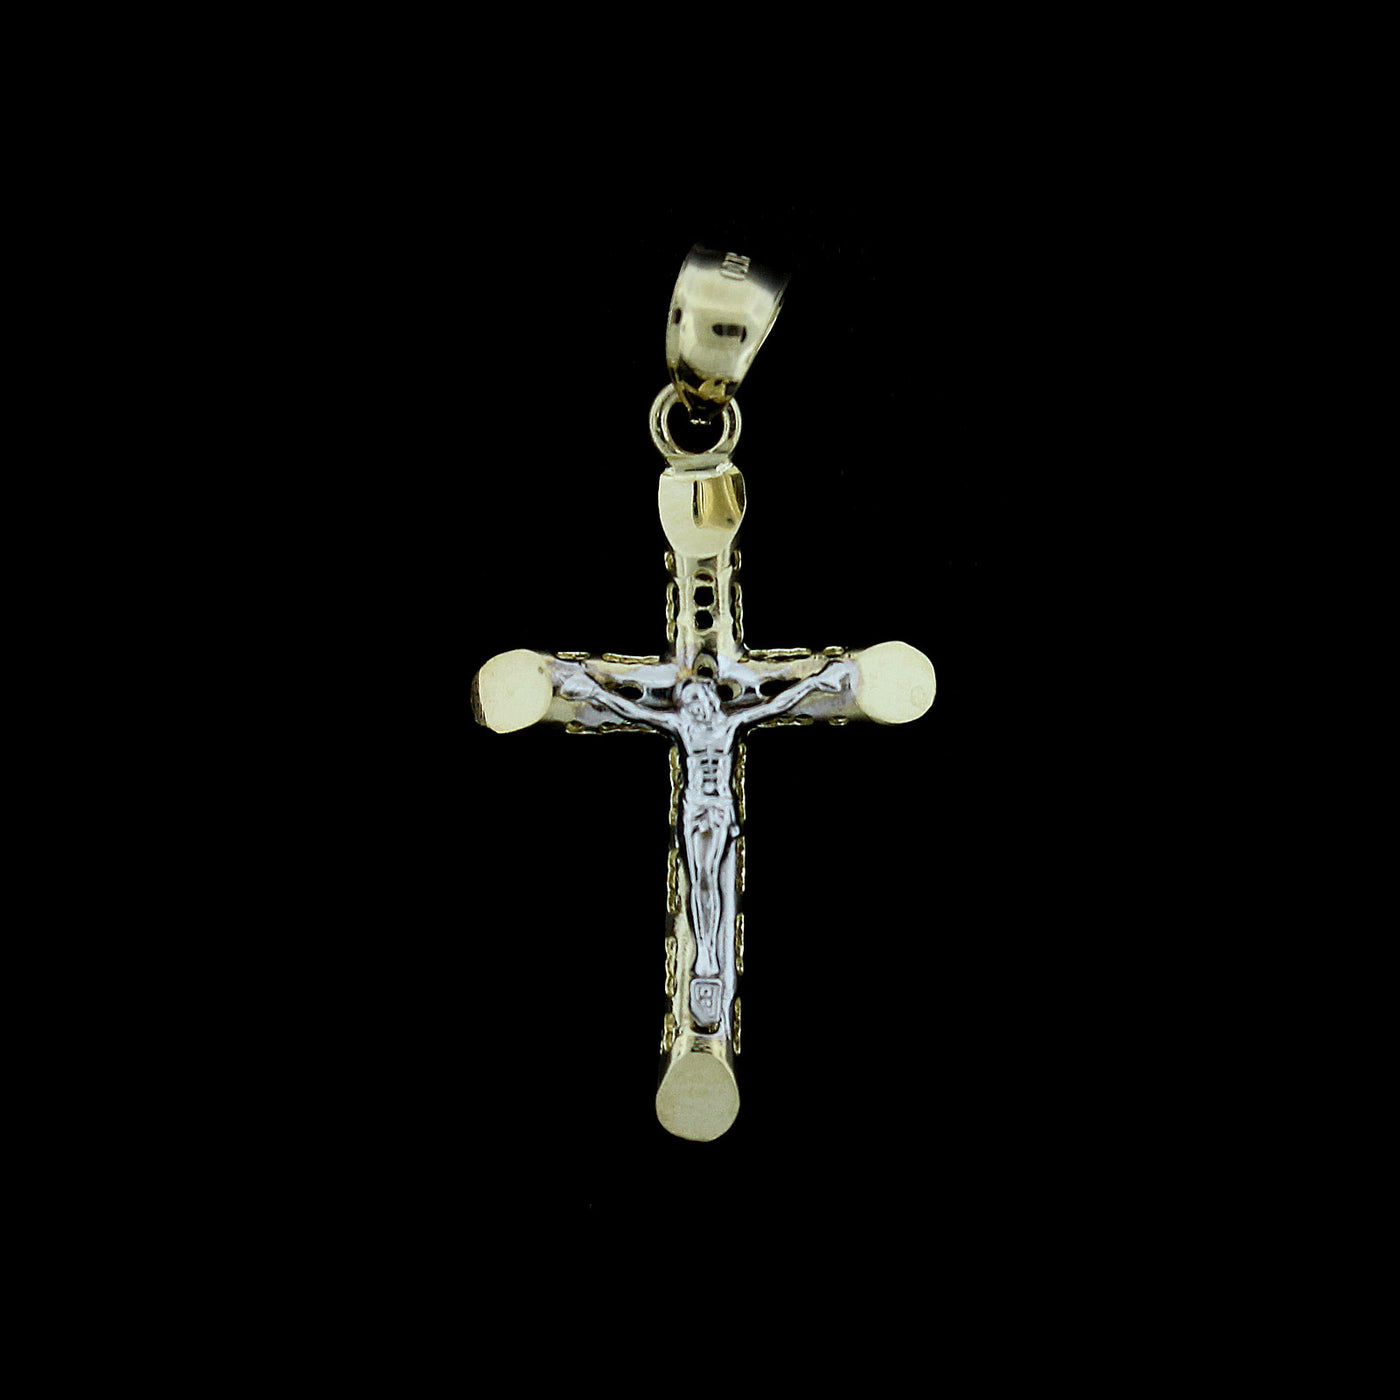 Real 10K Yellow Gold Filigree Cross Crucifix Charm Pendant & 2.5mm Rope Chain Necklace Set